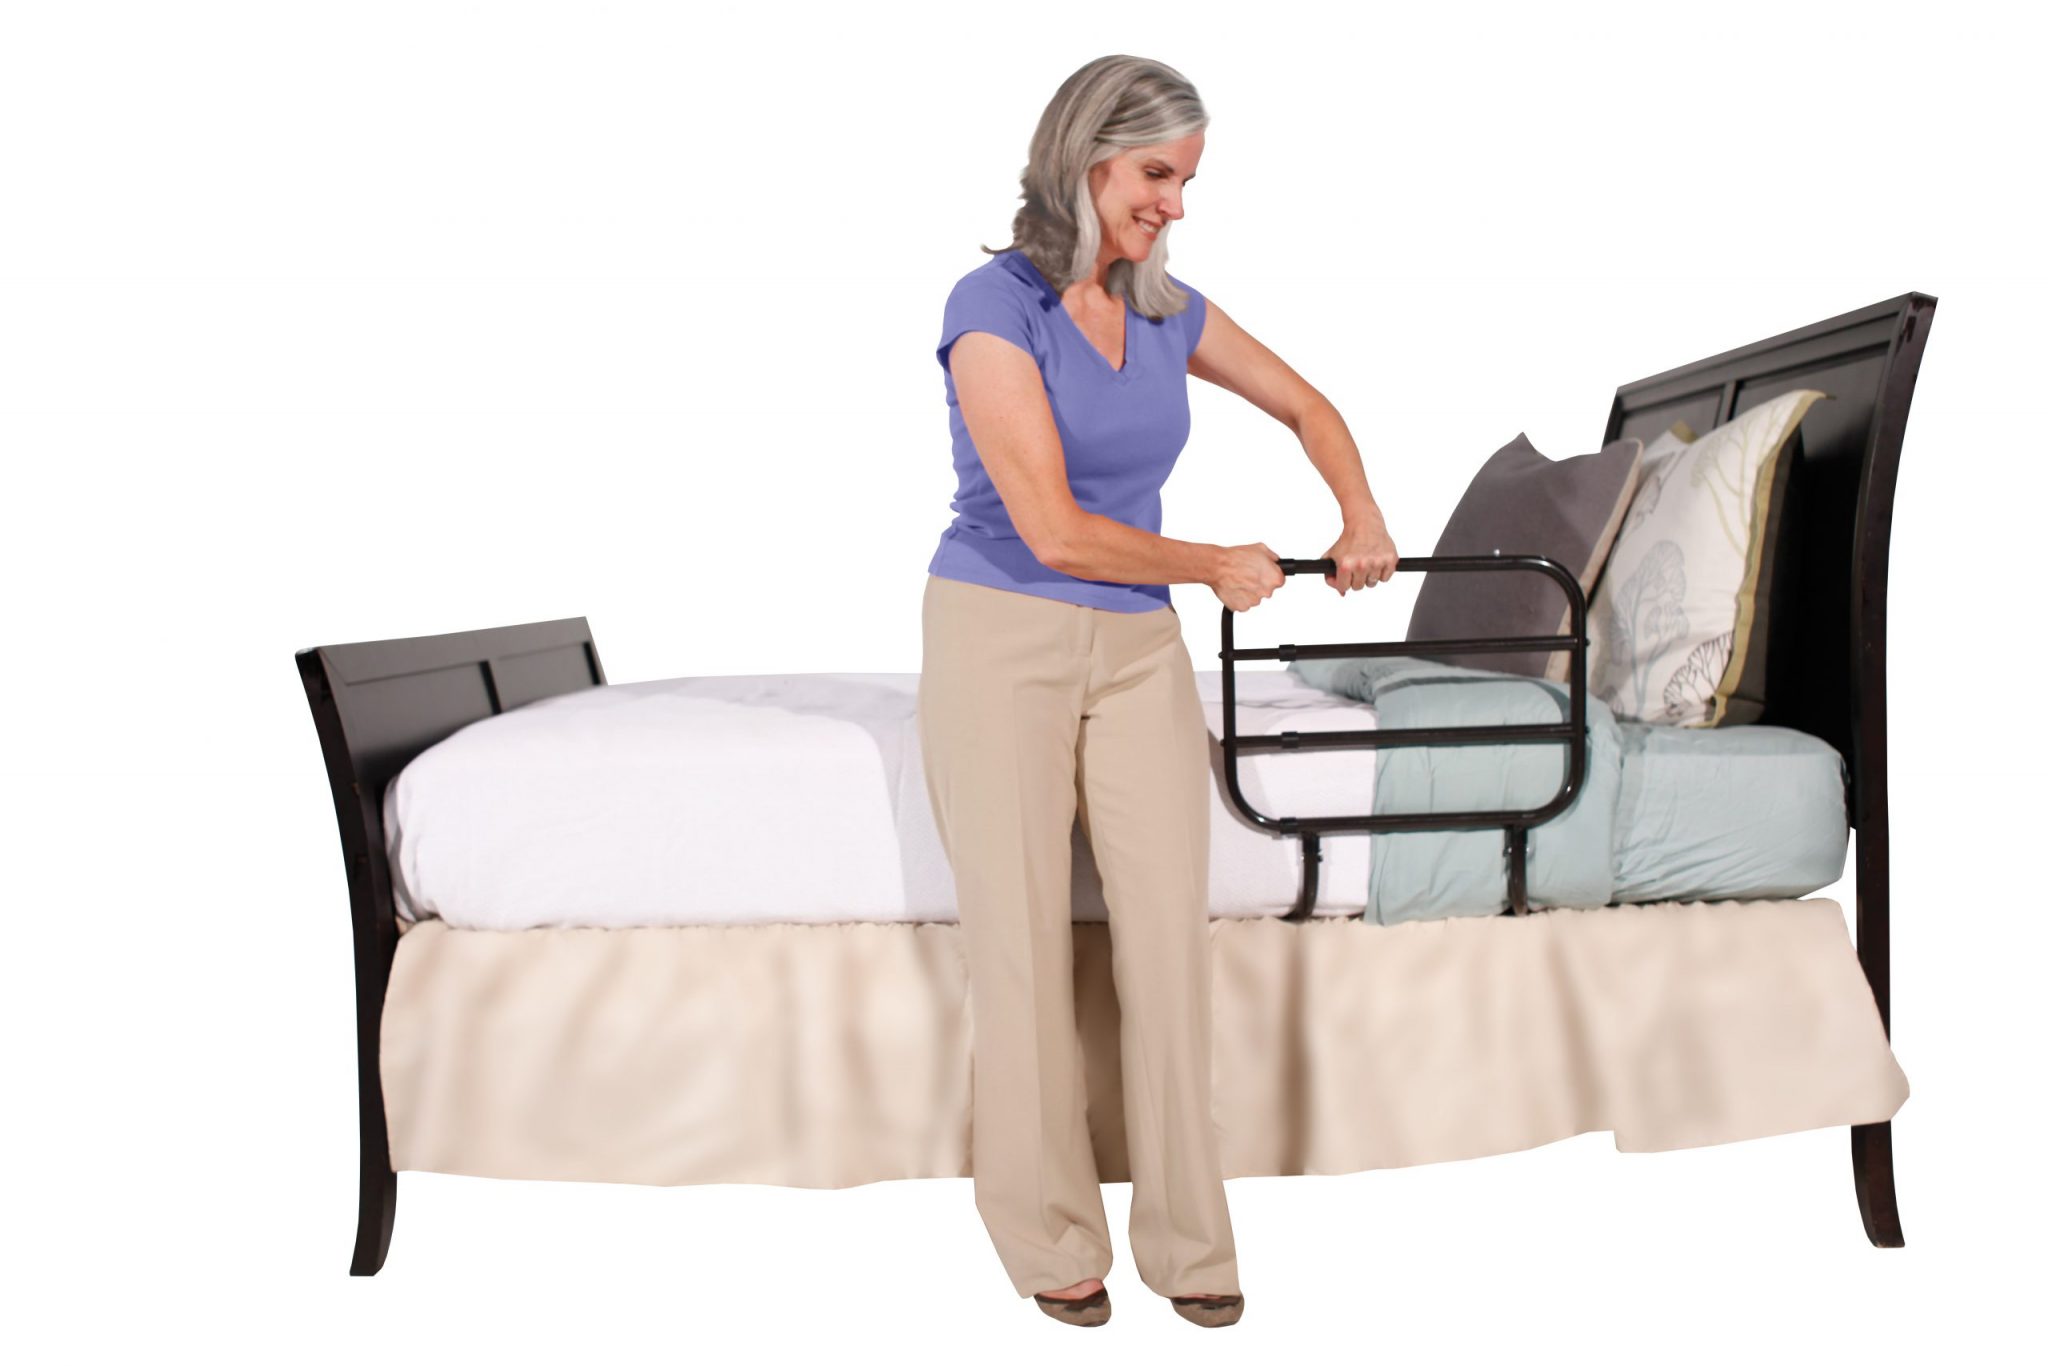 safety bed rails for seniors twin bed